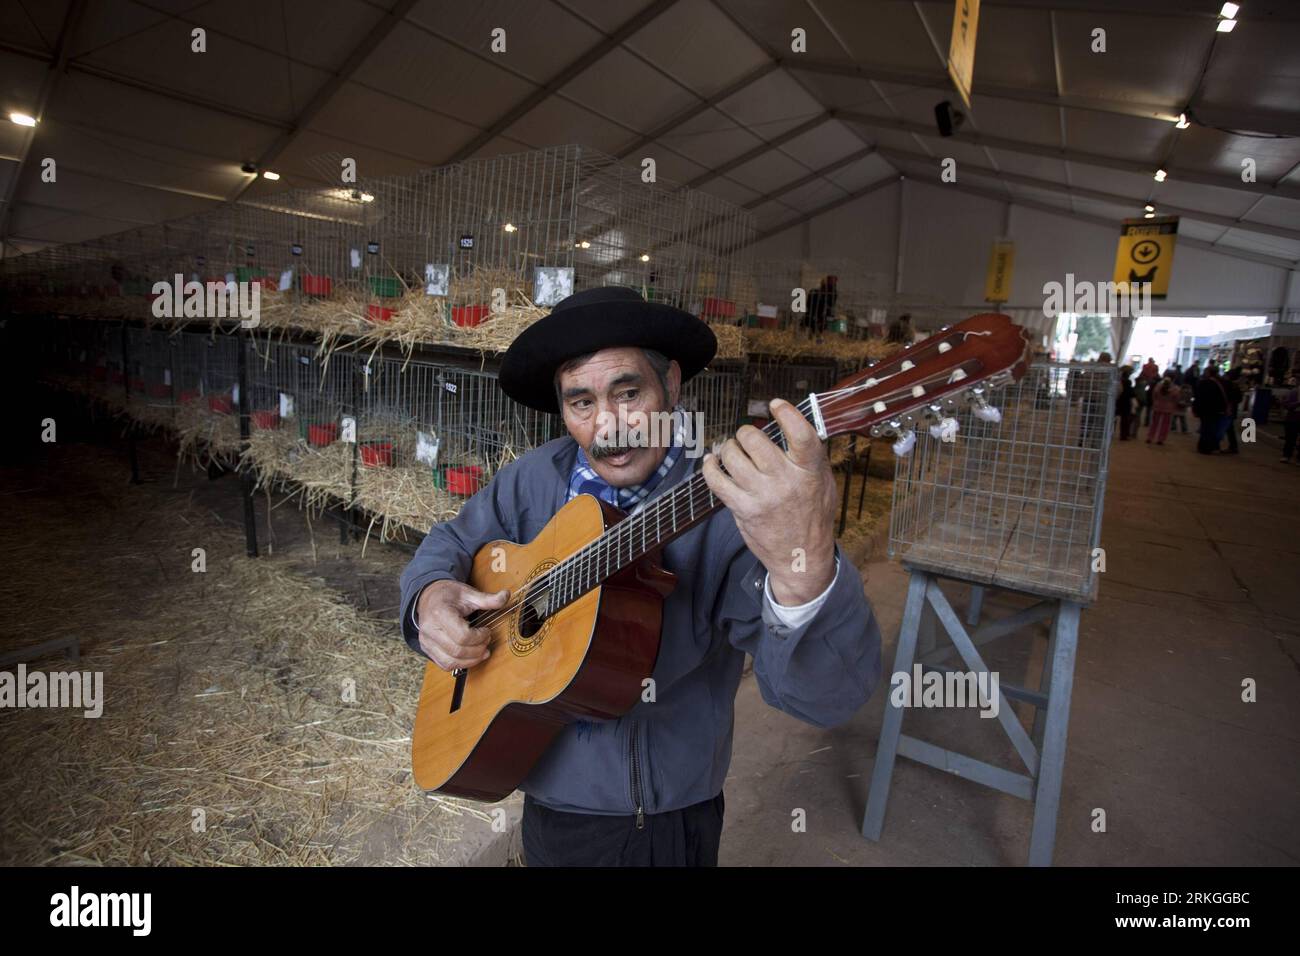 Bildnummer: 55594553  Datum: 14.07.2011  Copyright: imago/Xinhua (110715) -- BUENOS AIRES, July 15, 2011 (Xinhua) -- A man plays guitar during the first day of the 125th La Rural Expo, the most important cattle and farming expo in Argentina, in Buenos Aires, Argentina, July 14, 2011. (Xinhua/Martin Zabala) (xhn) ARGENTINA-BUENOS AIRES-LA RURAL PUBLICATIONxNOTxINxCHN Gesellschaft Wirtschaft Landwirtschaft Messe Landwirtschaftsmesse xjh 2011 quer o0 Musik Tradition Gaucho    Bildnummer 55594553 Date 14 07 2011 Copyright Imago XINHUA 110 715 Buenos Aires July 15 2011 XINHUA a Man PLAYS Guitar dur Stock Photo